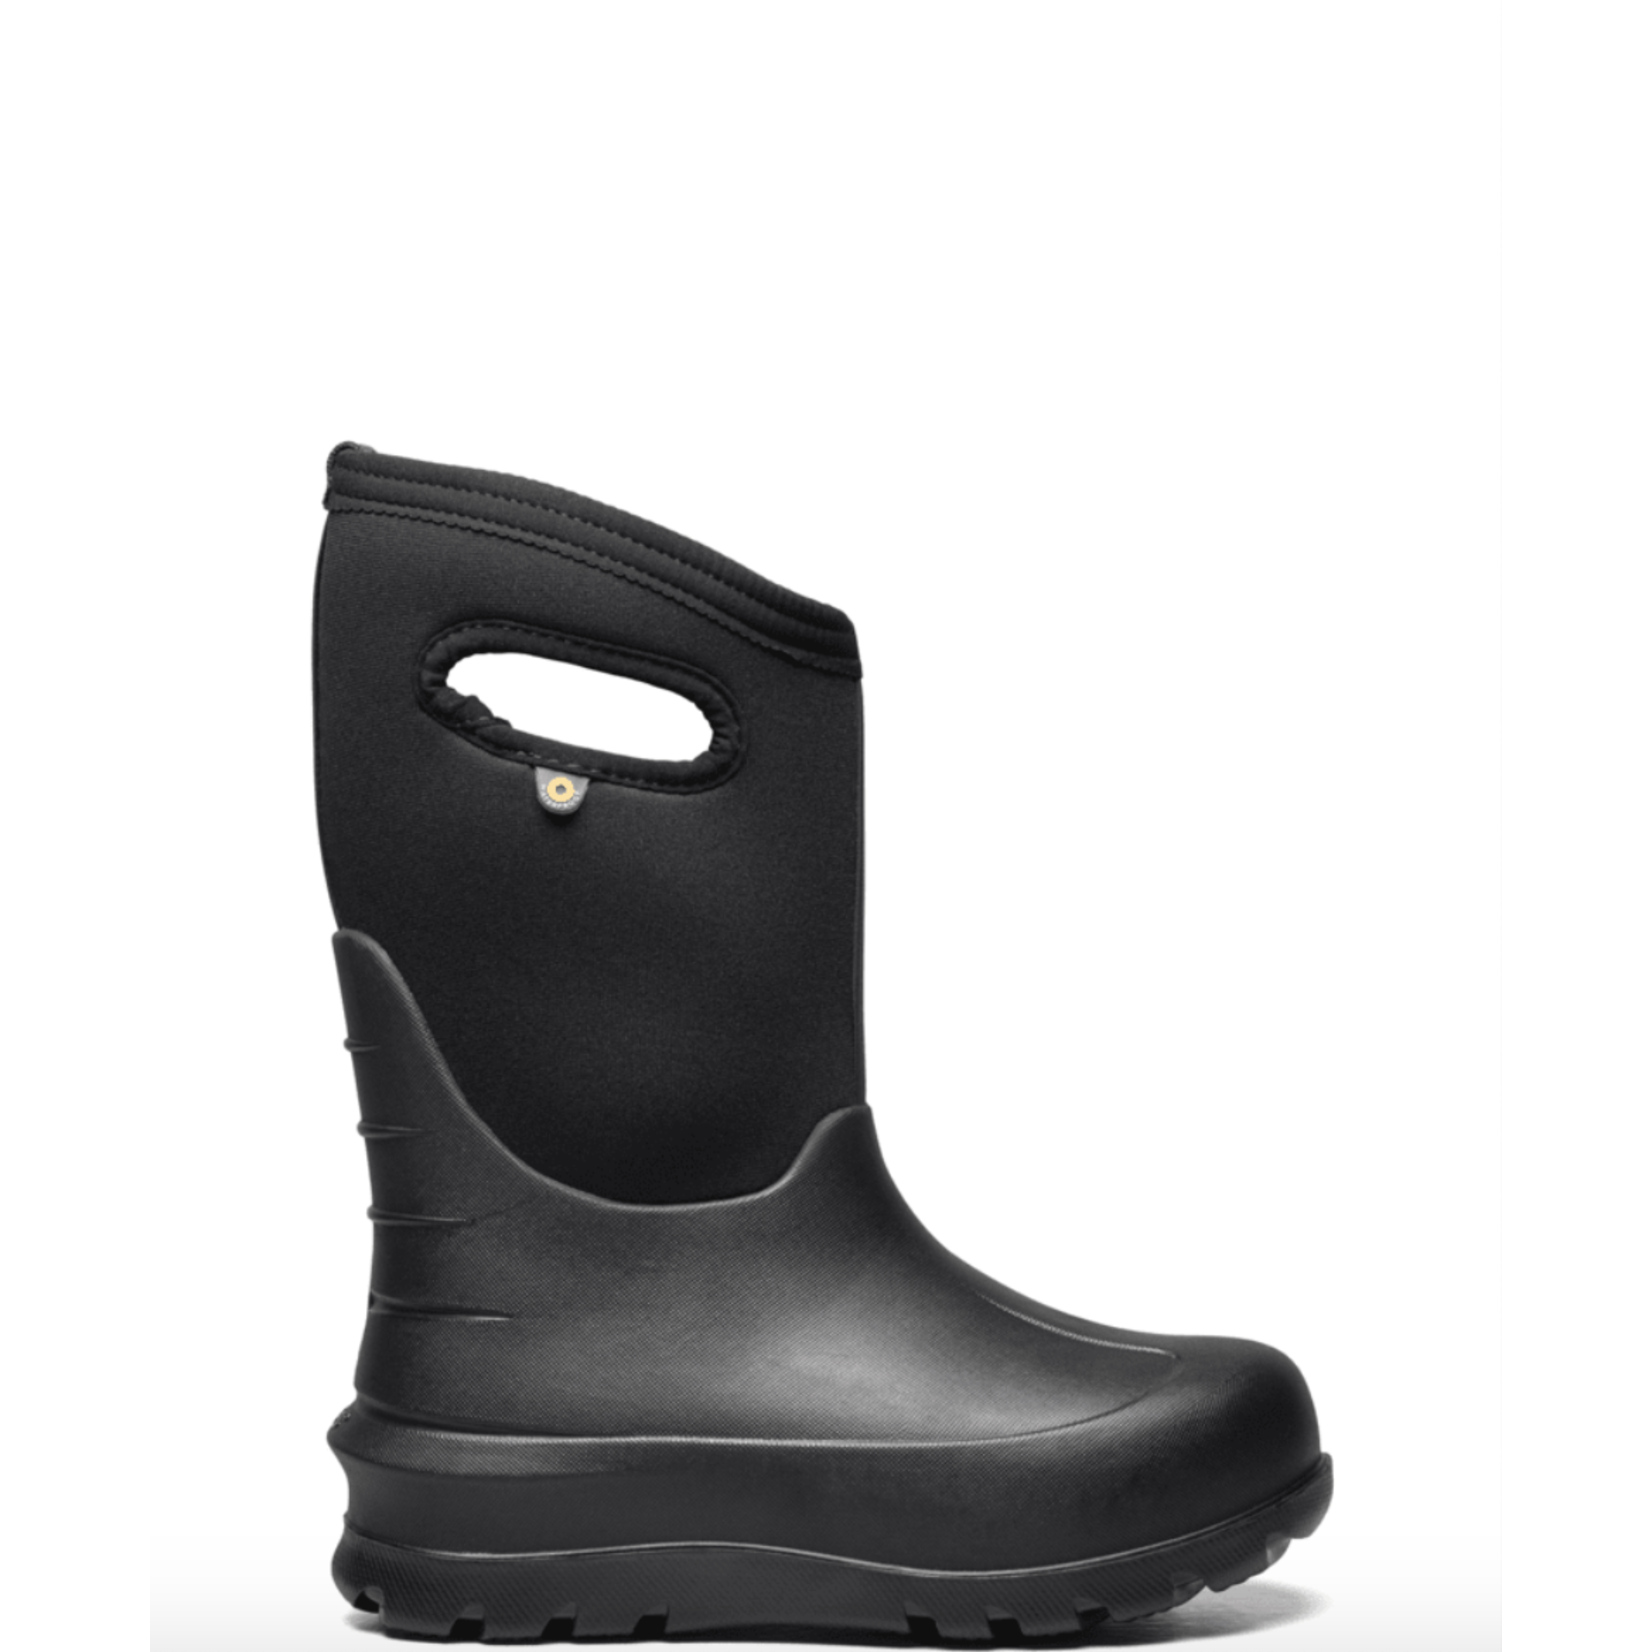 Bogs Bogs Neo Classic Black Solid